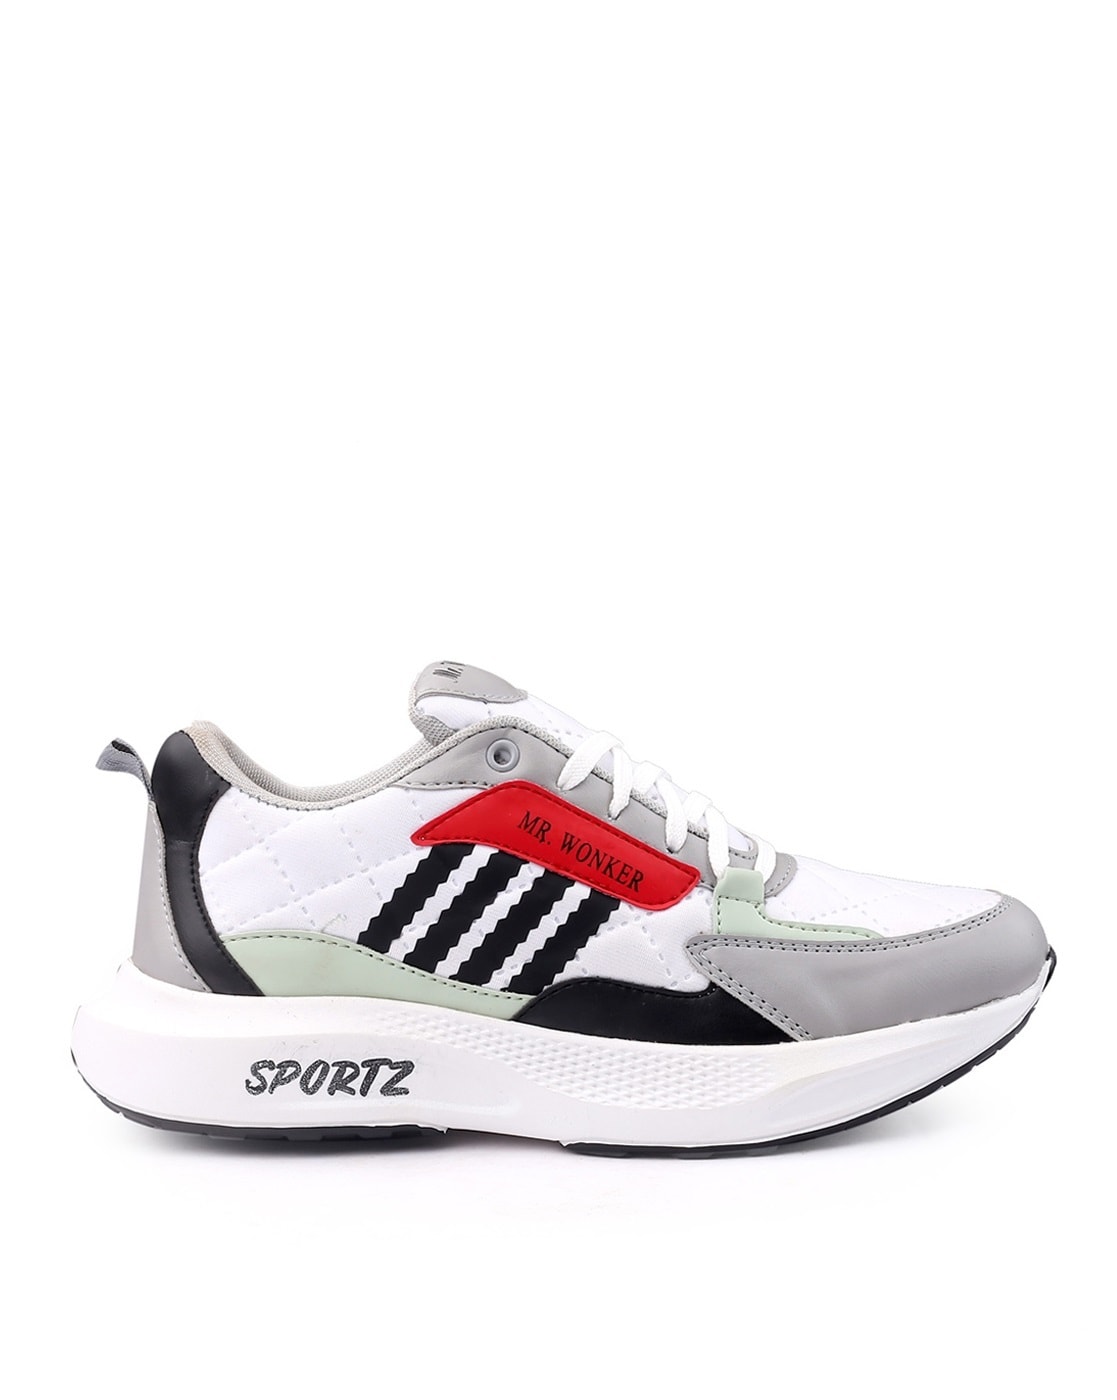 Buy MR.WONKER Synthetic Lace Up Women's Double Less Sneakers | Shoppers Stop